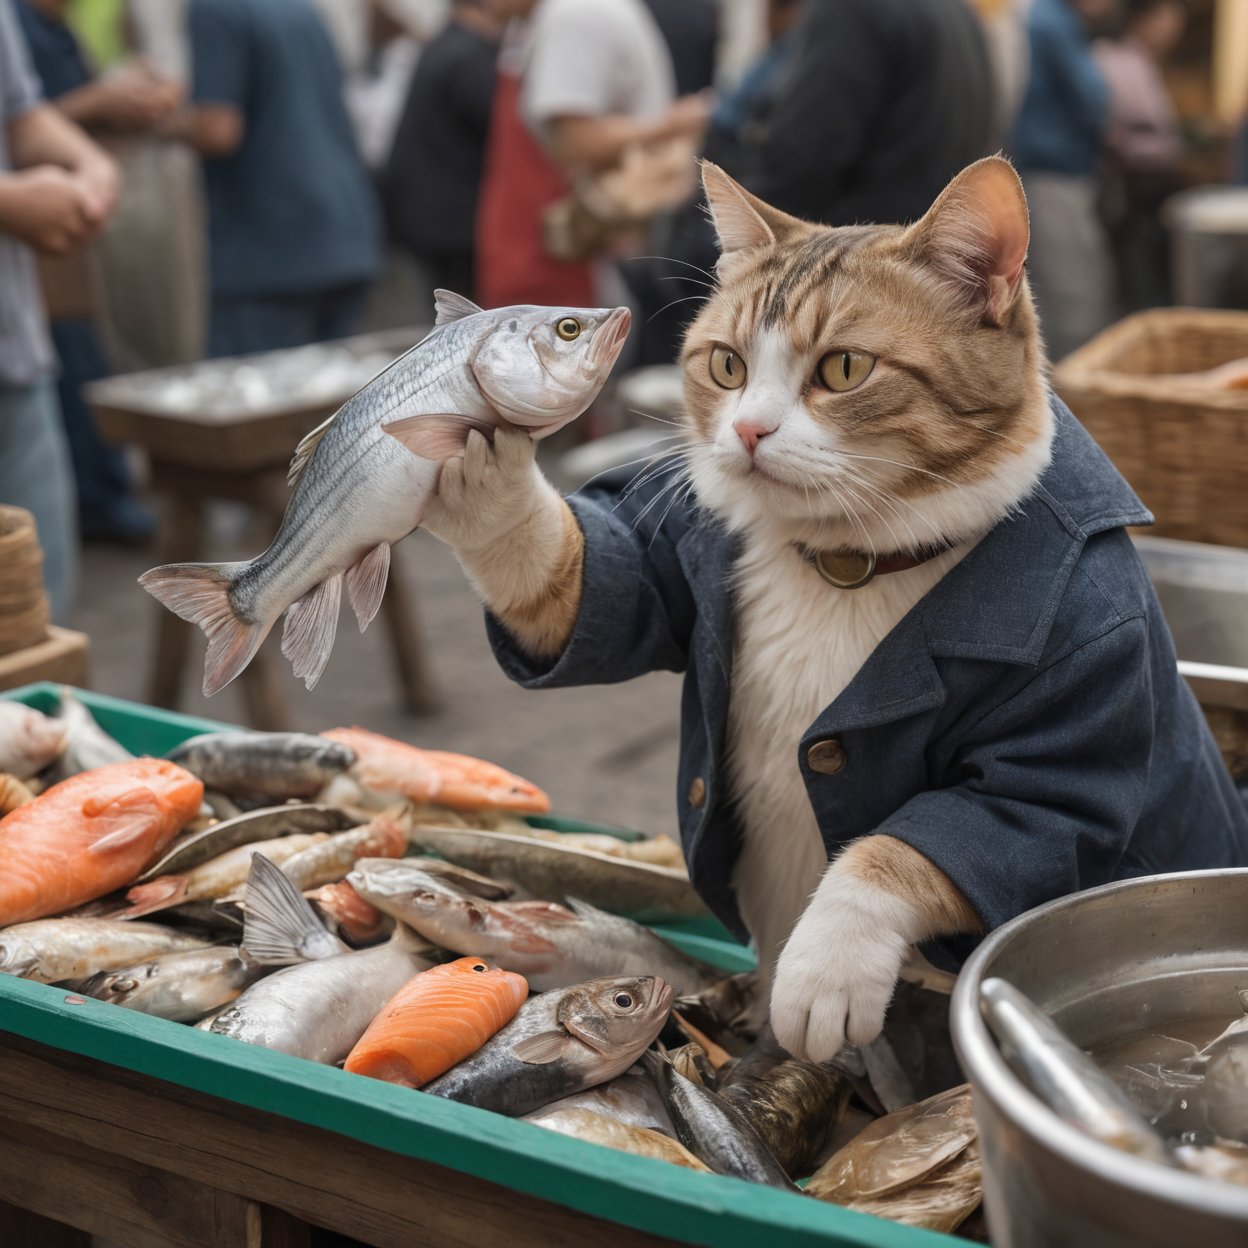 image of a hand offering money to a fishmonger cat, holding fish, ultra detailed, at the market, 